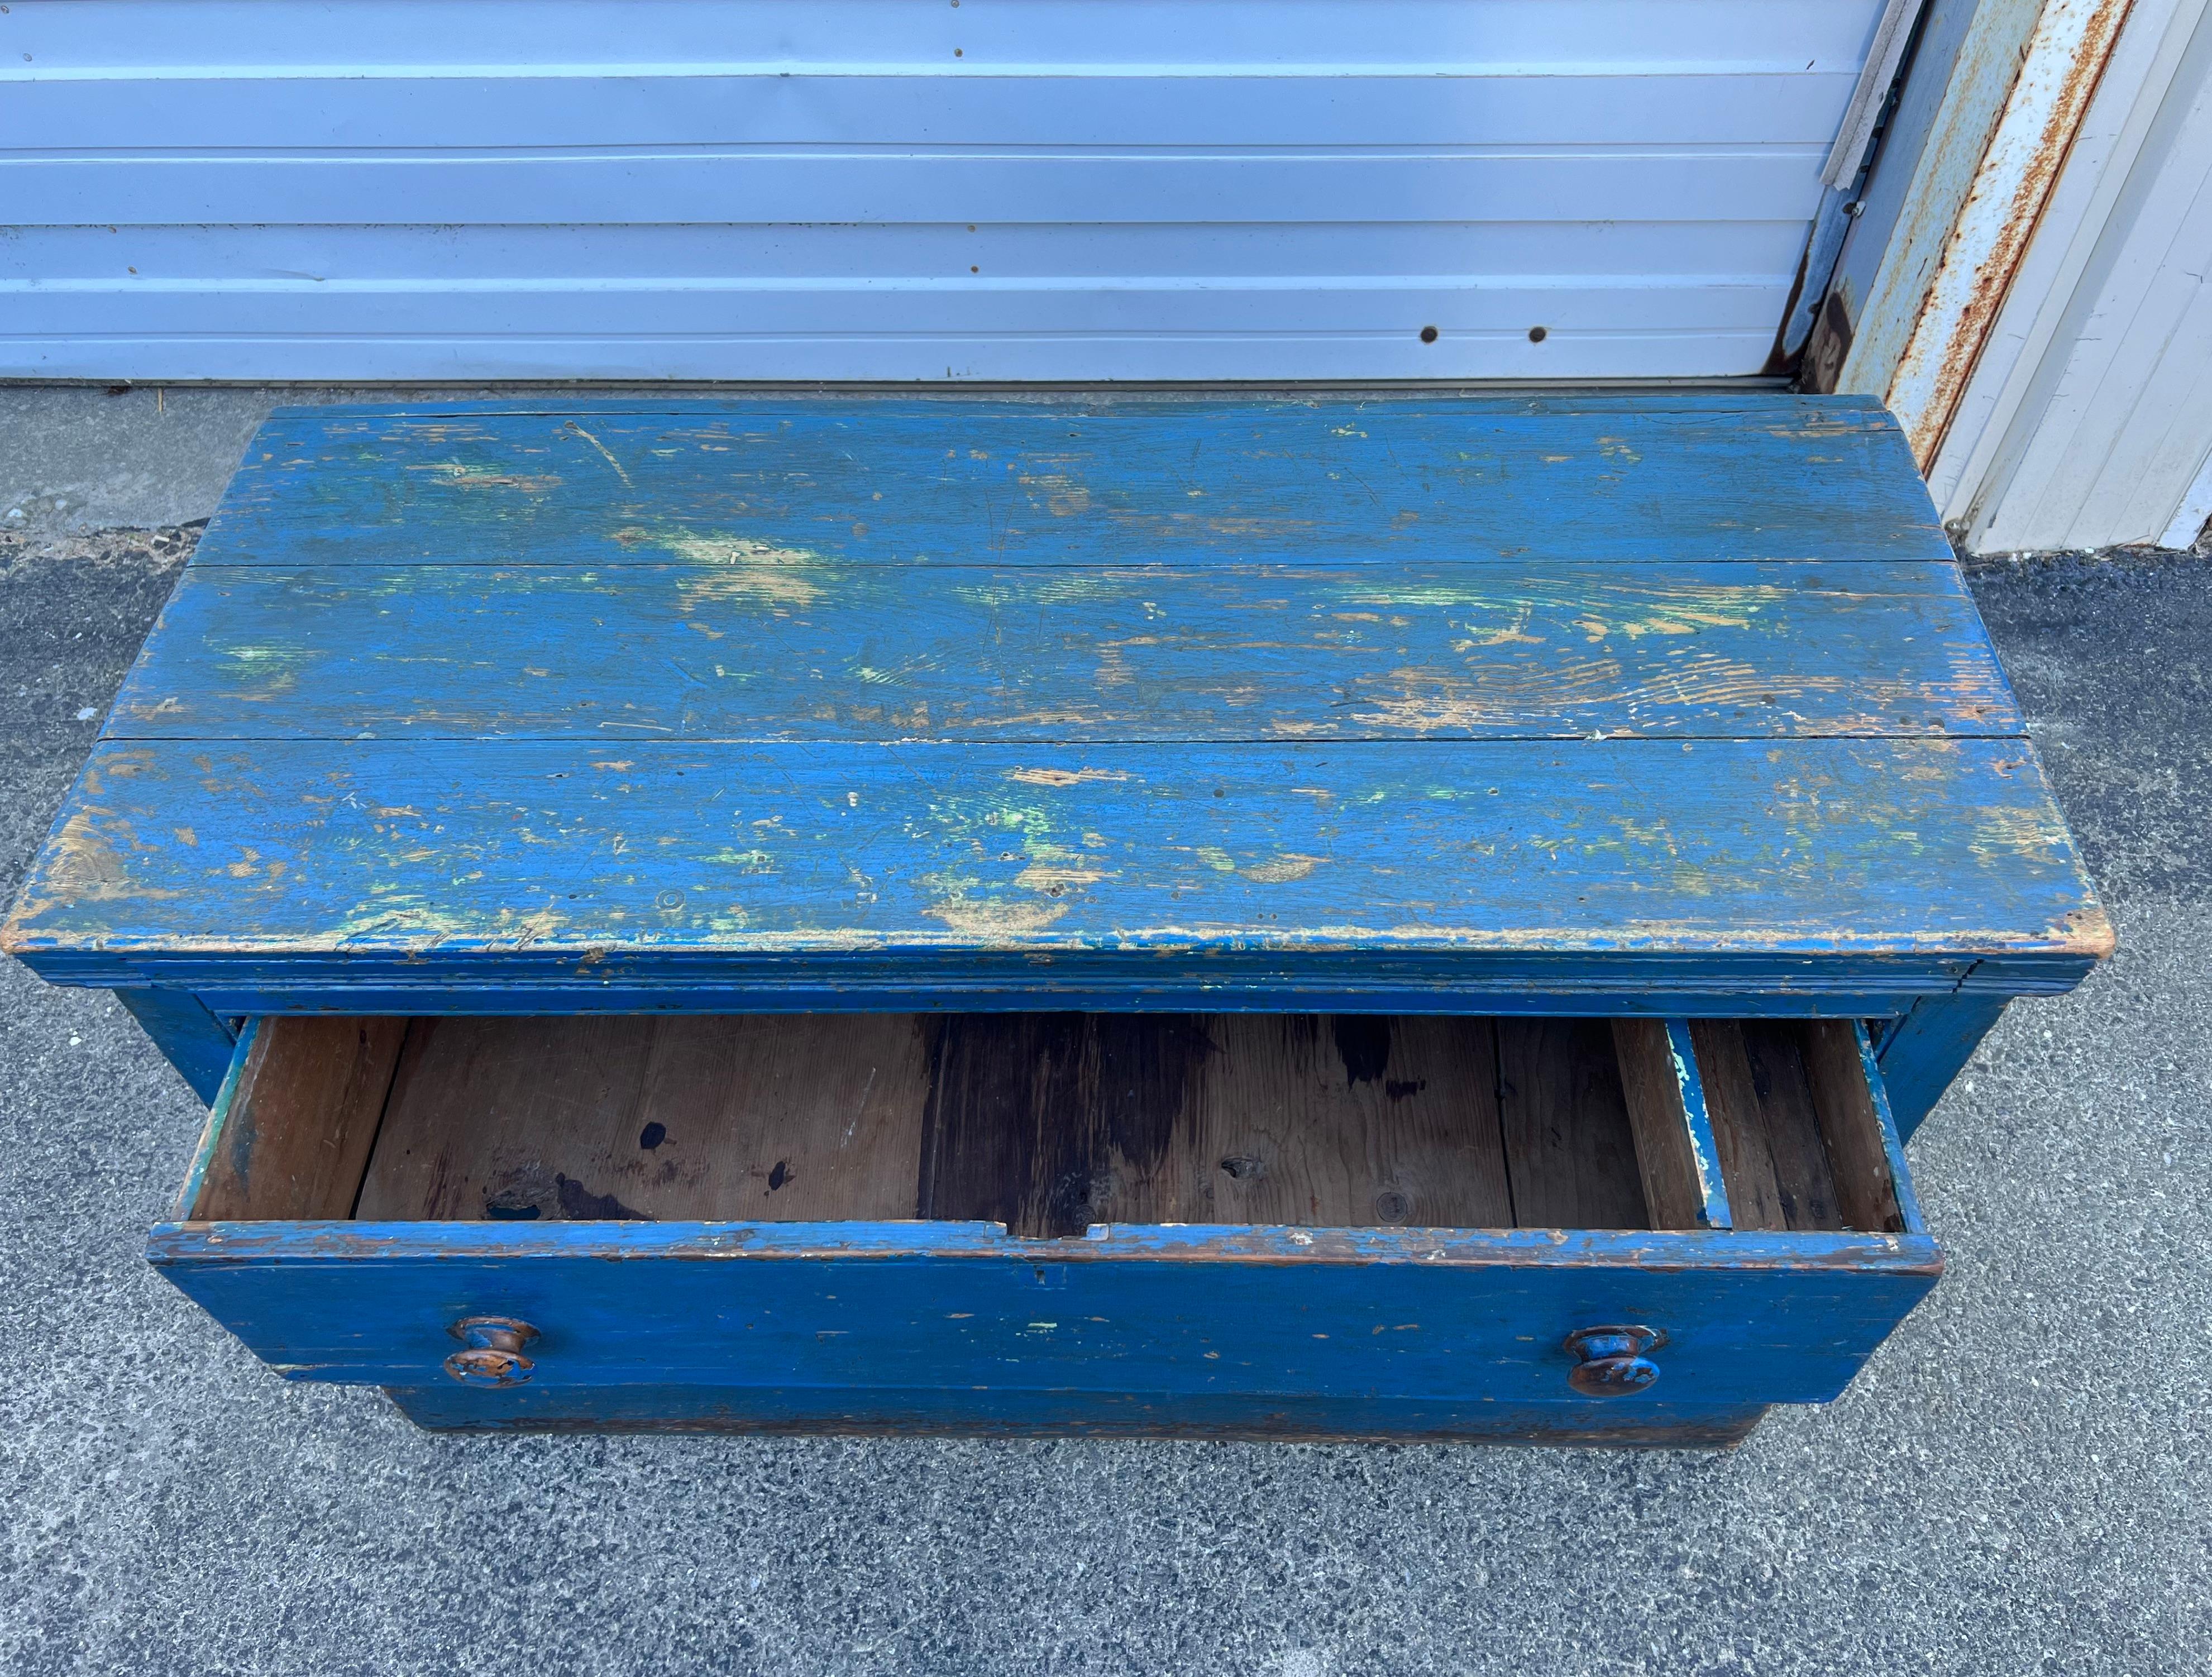 19th century low chest of (two) drawers with turned wooden knobs.  Constructed from pine in original/early bright blue paint, both upper and lower drawers feature original tills.  Circa 1870, found in Nova Scotia.